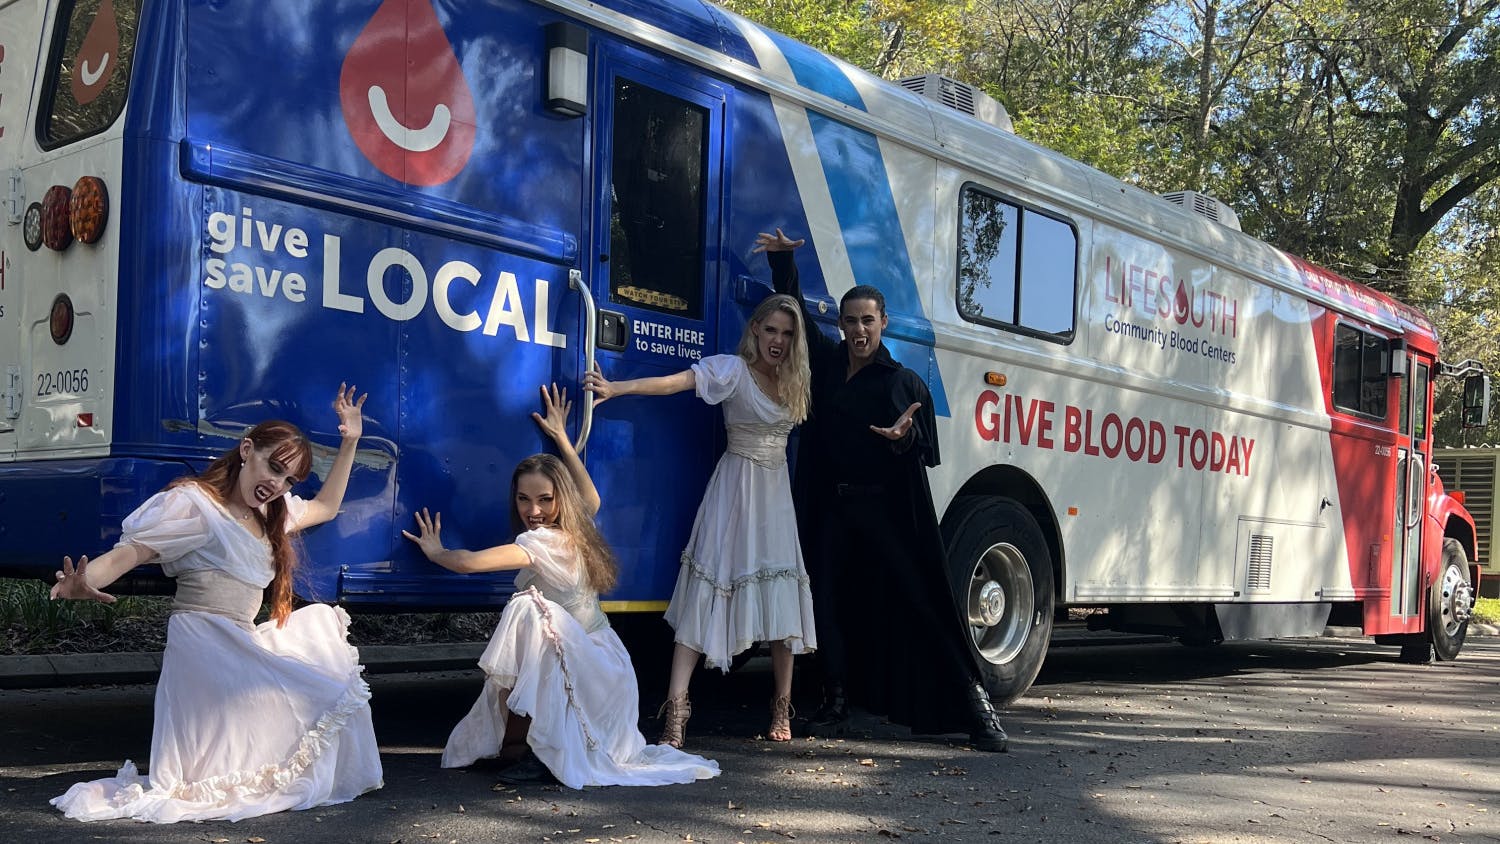 Dance Alive National Ballet has partnered with LifeSouth, a non-profit community blood bank that supplies hospitals in Florida.